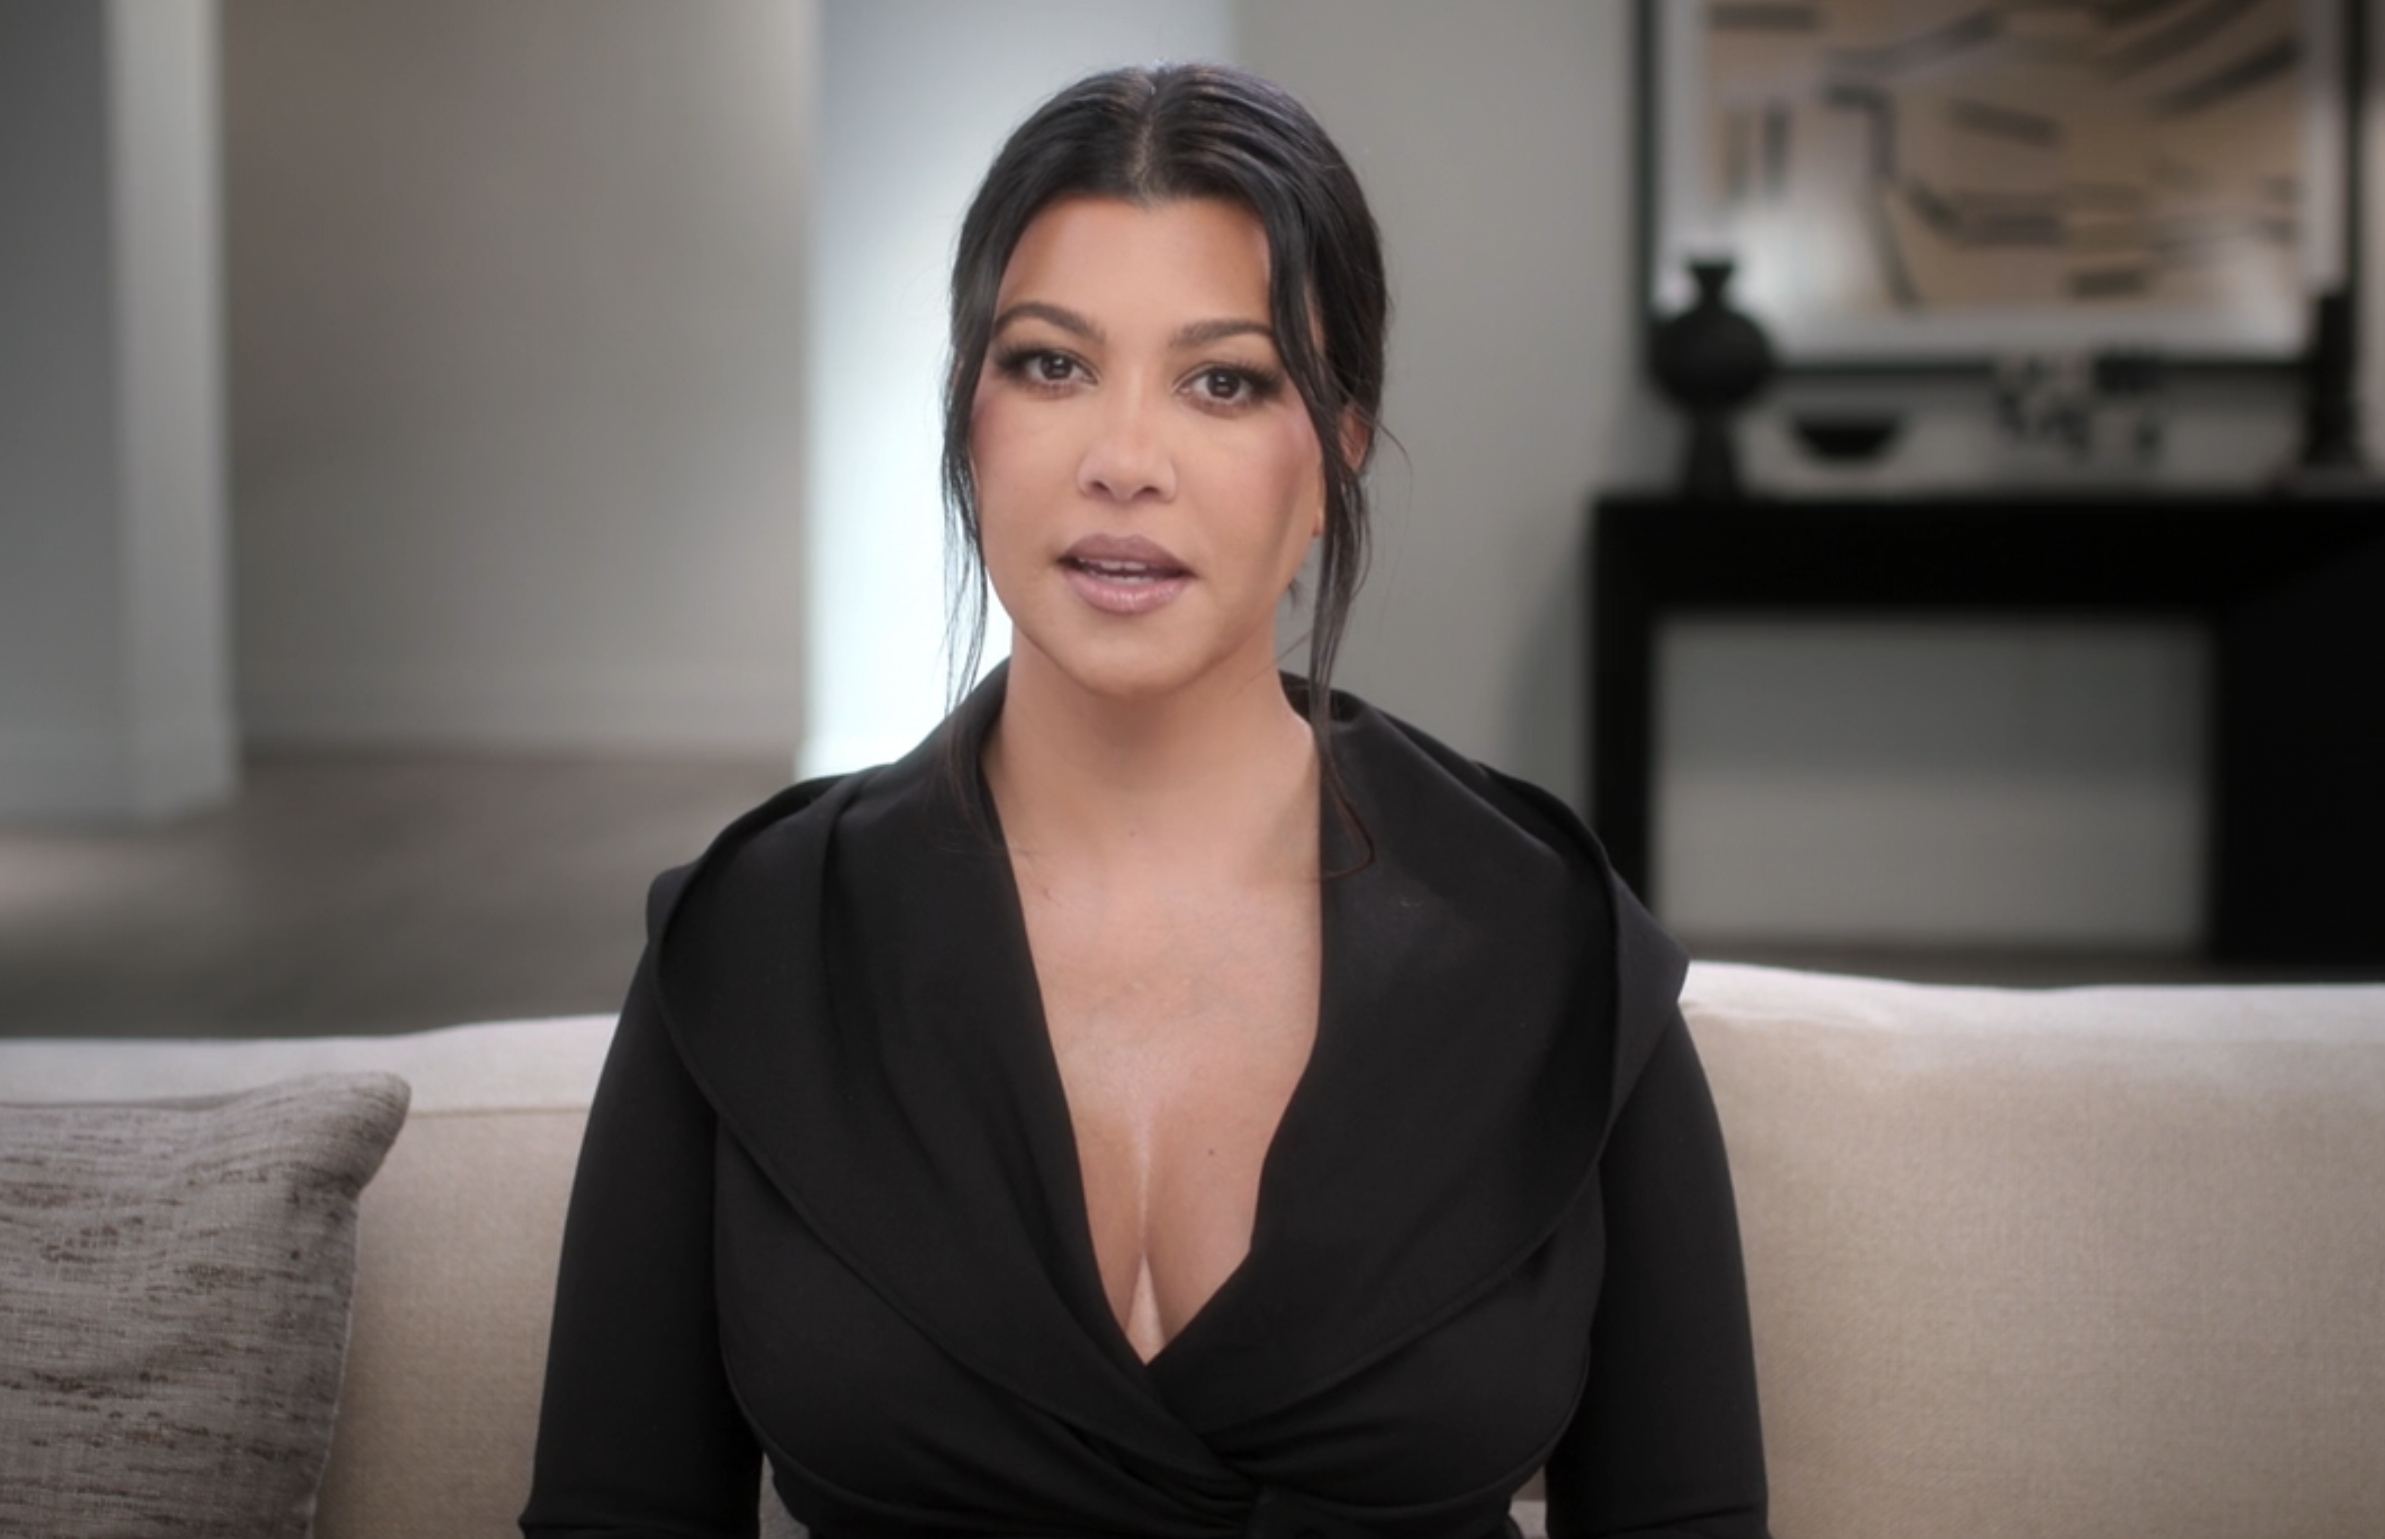 Kourtney Kardashian sits on a couch in a modern living room, wearing a stylish black v-neck top. She is facing the camera, delivering a message